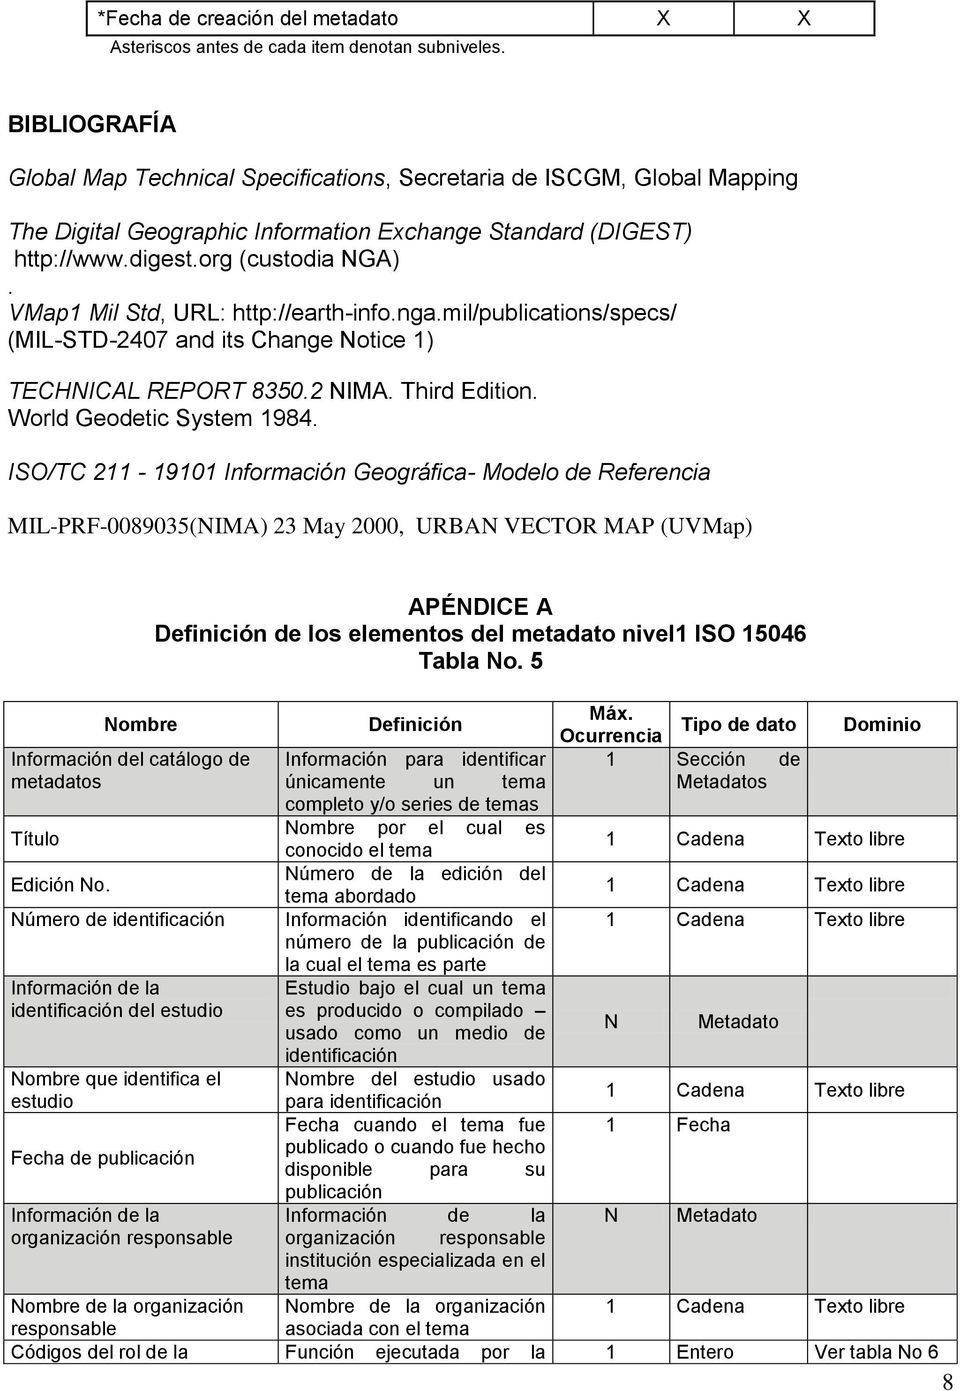 VMap1 Mil Std, URL: http://earth-info.nga.mil/publications/specs/ (MIL-STD-2407 and its Change Notice 1) TECHNICAL REPORT 8350.2 NIMA. Third Edition. World Geodetic System 1984.